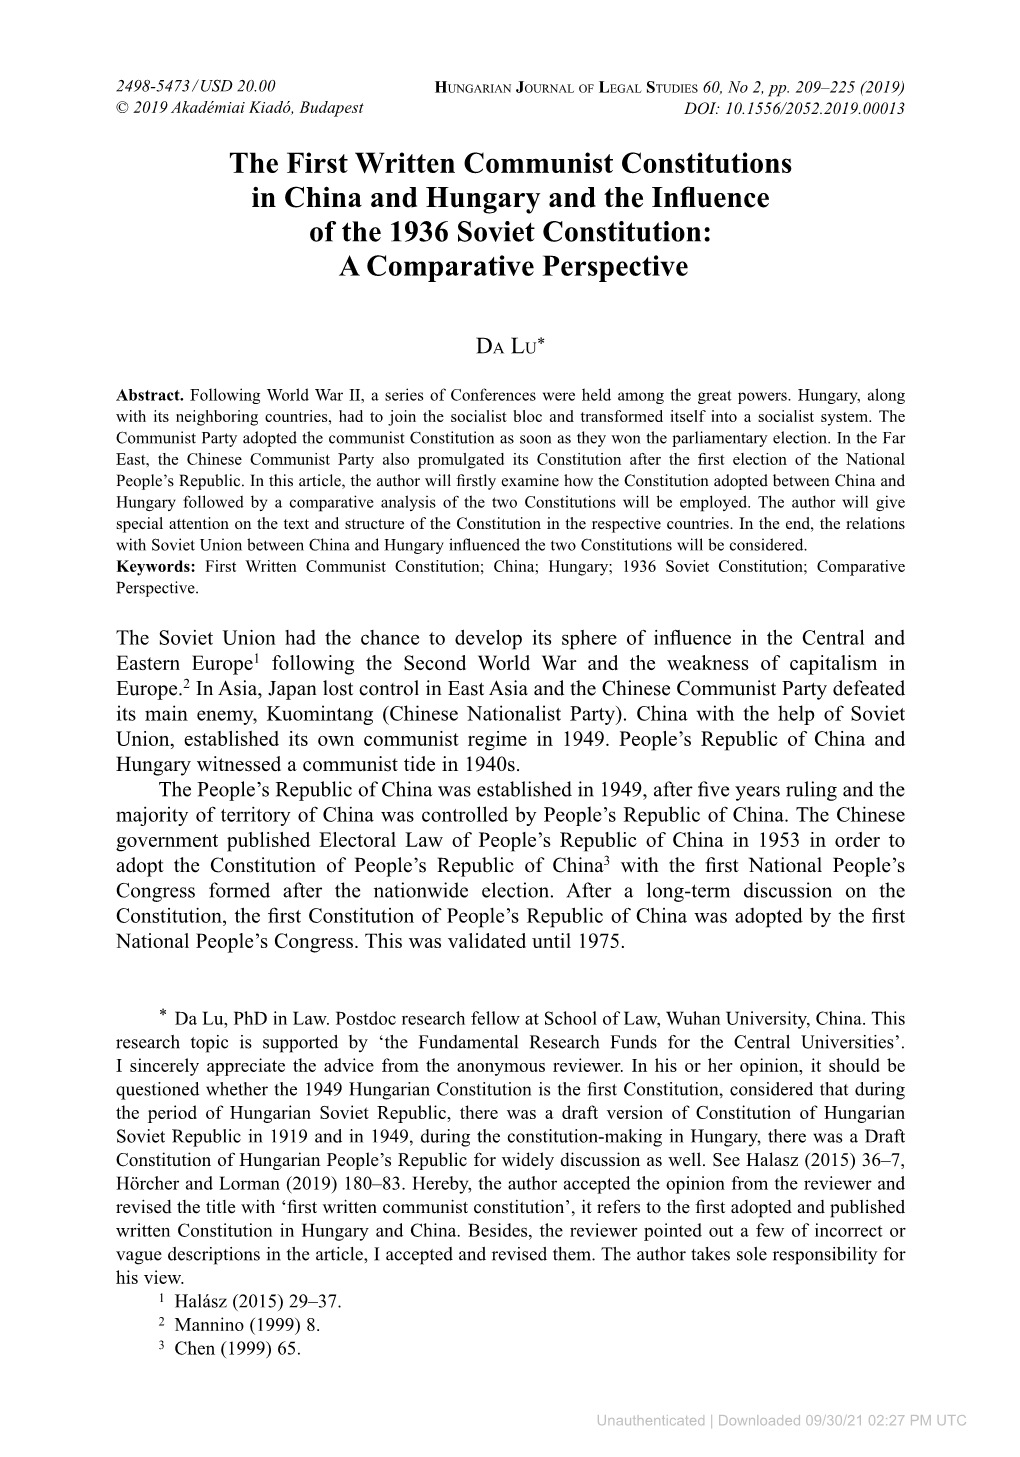 The First Written Communist Constitutions in China and Hungary and the Influence of the 1936 Soviet Constitution: a Comparative Perspective